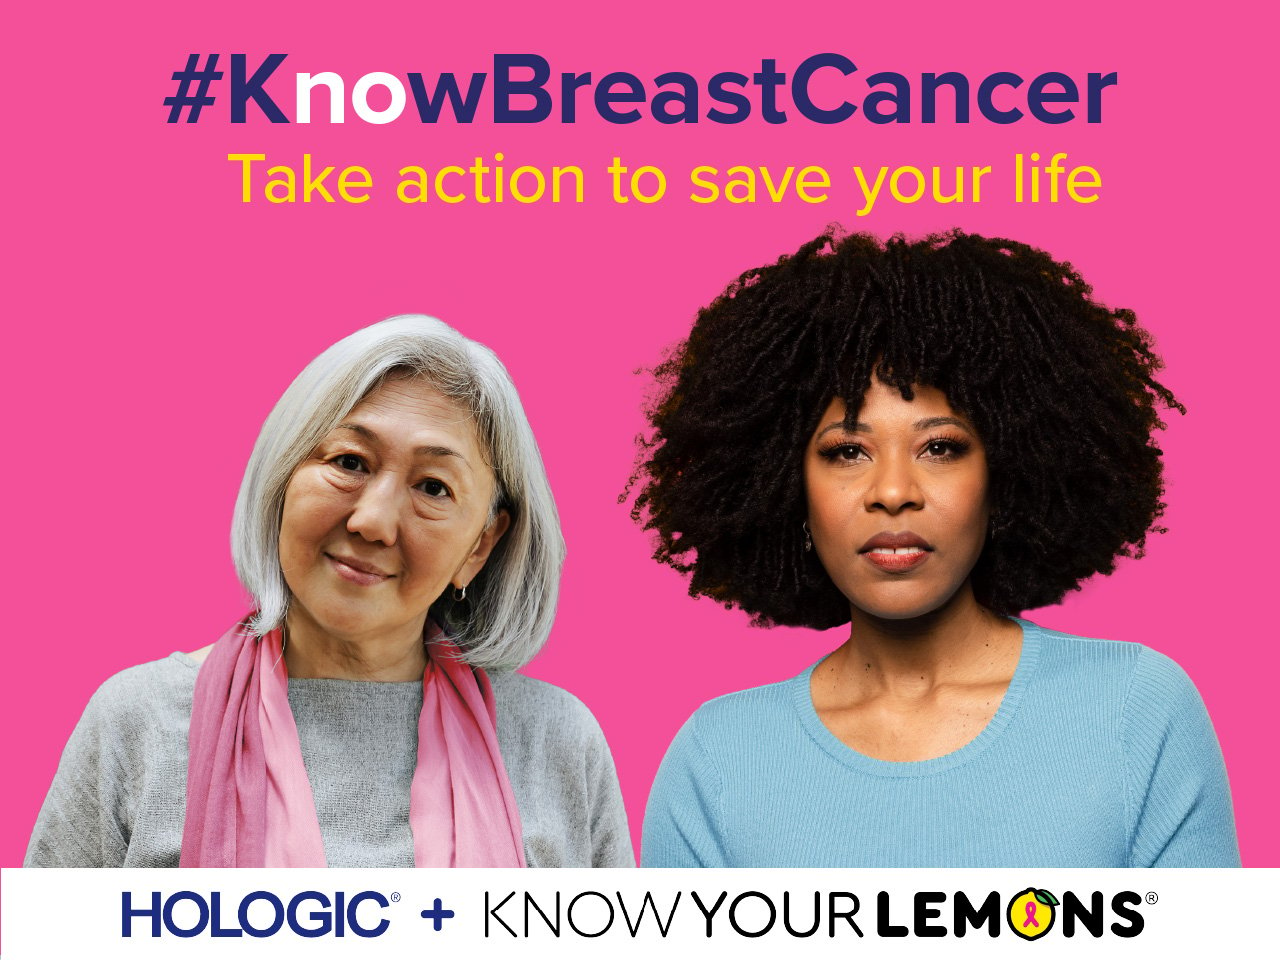 A graphic from Hologics KnowBreastCancer campaign